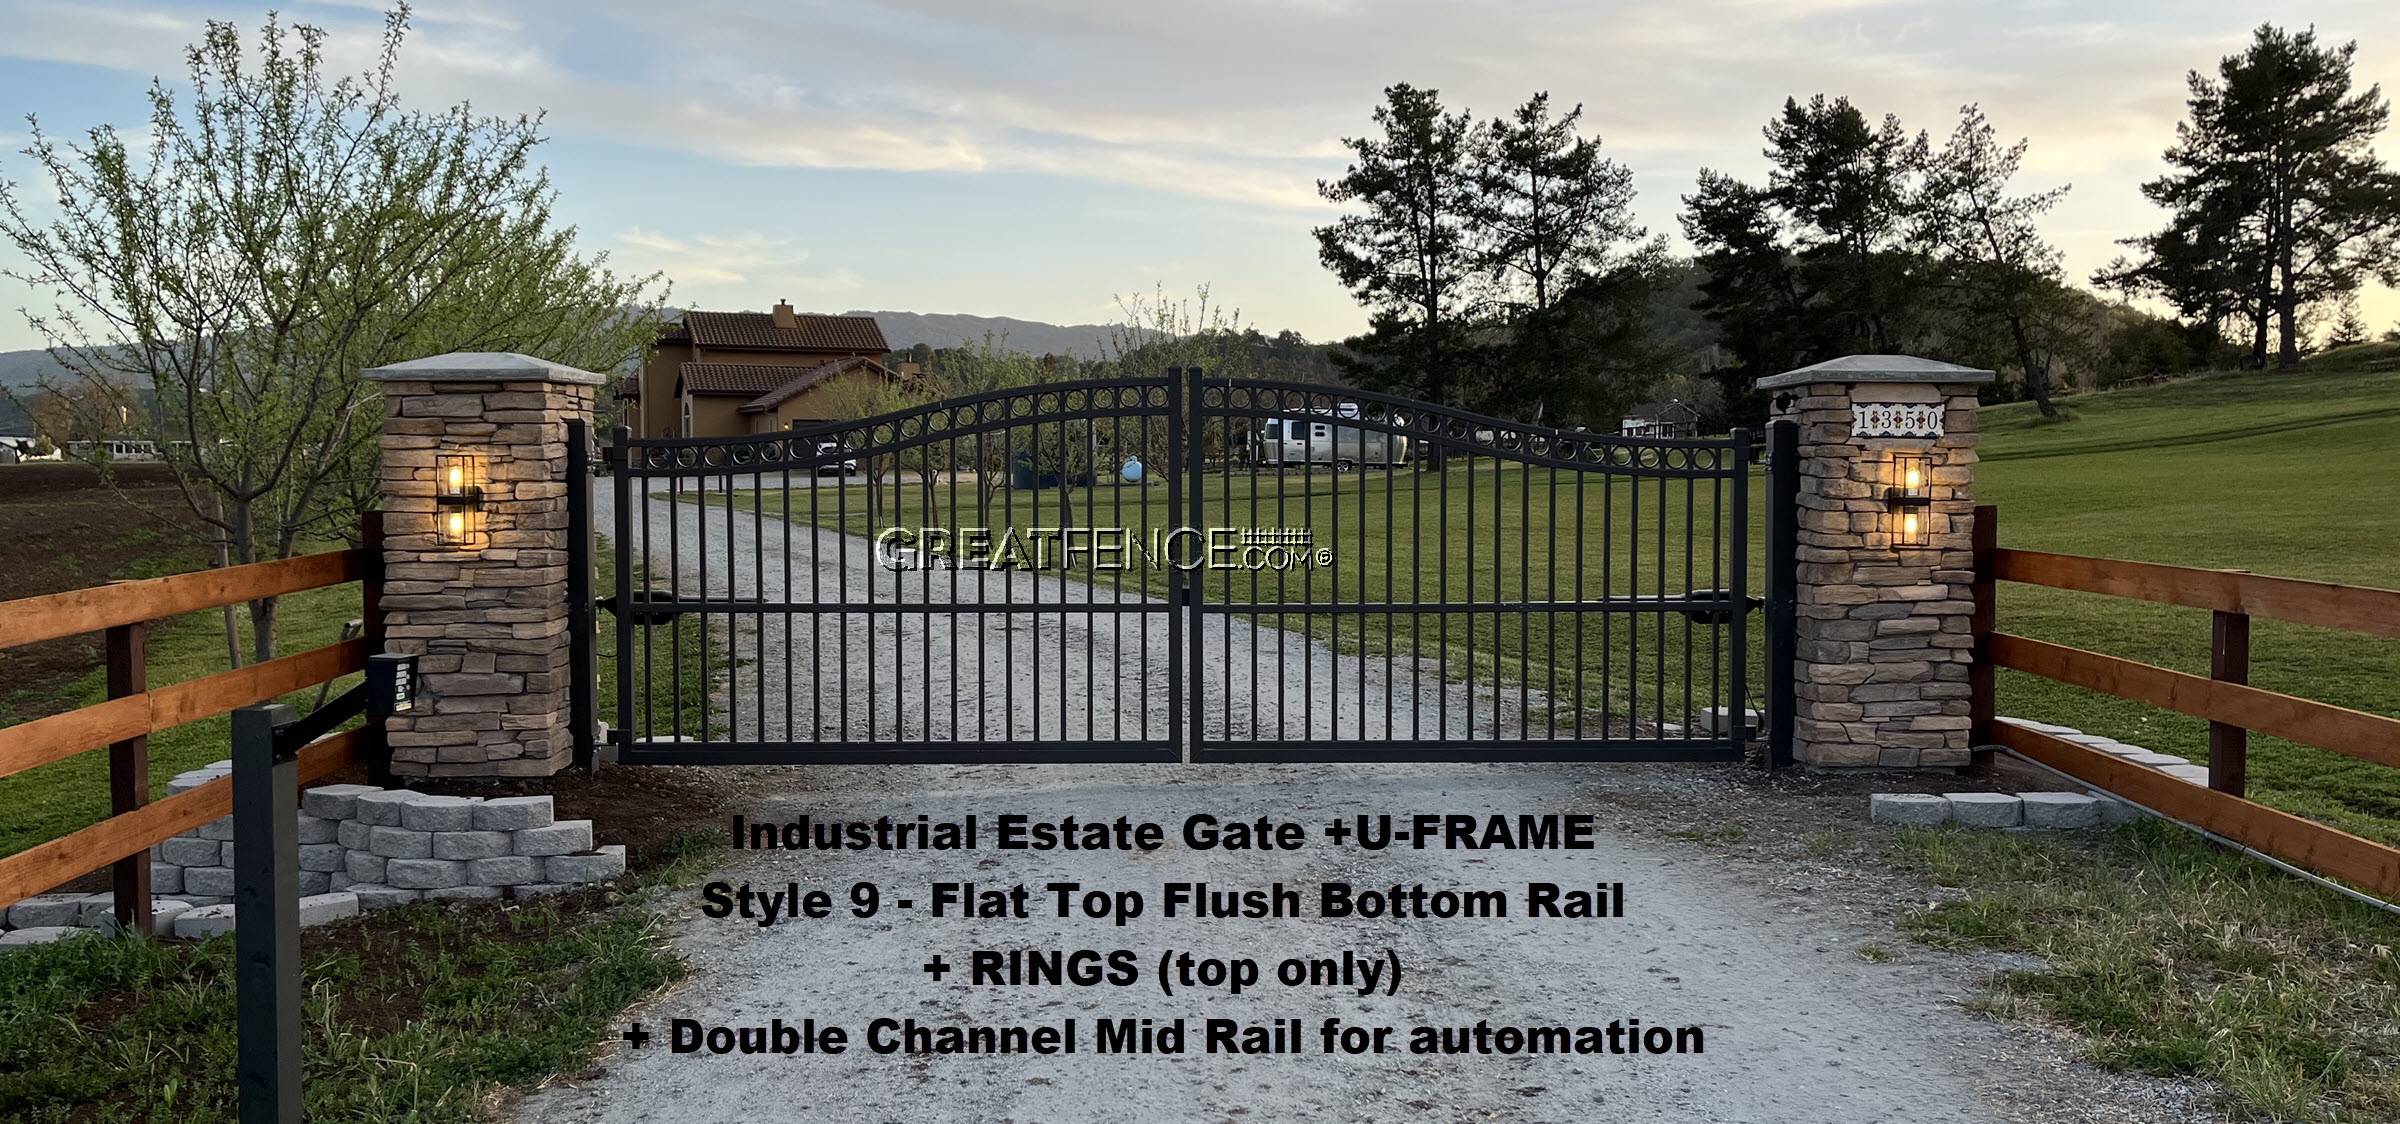 Aluminum Estate Gate with Rings and Mid Rail